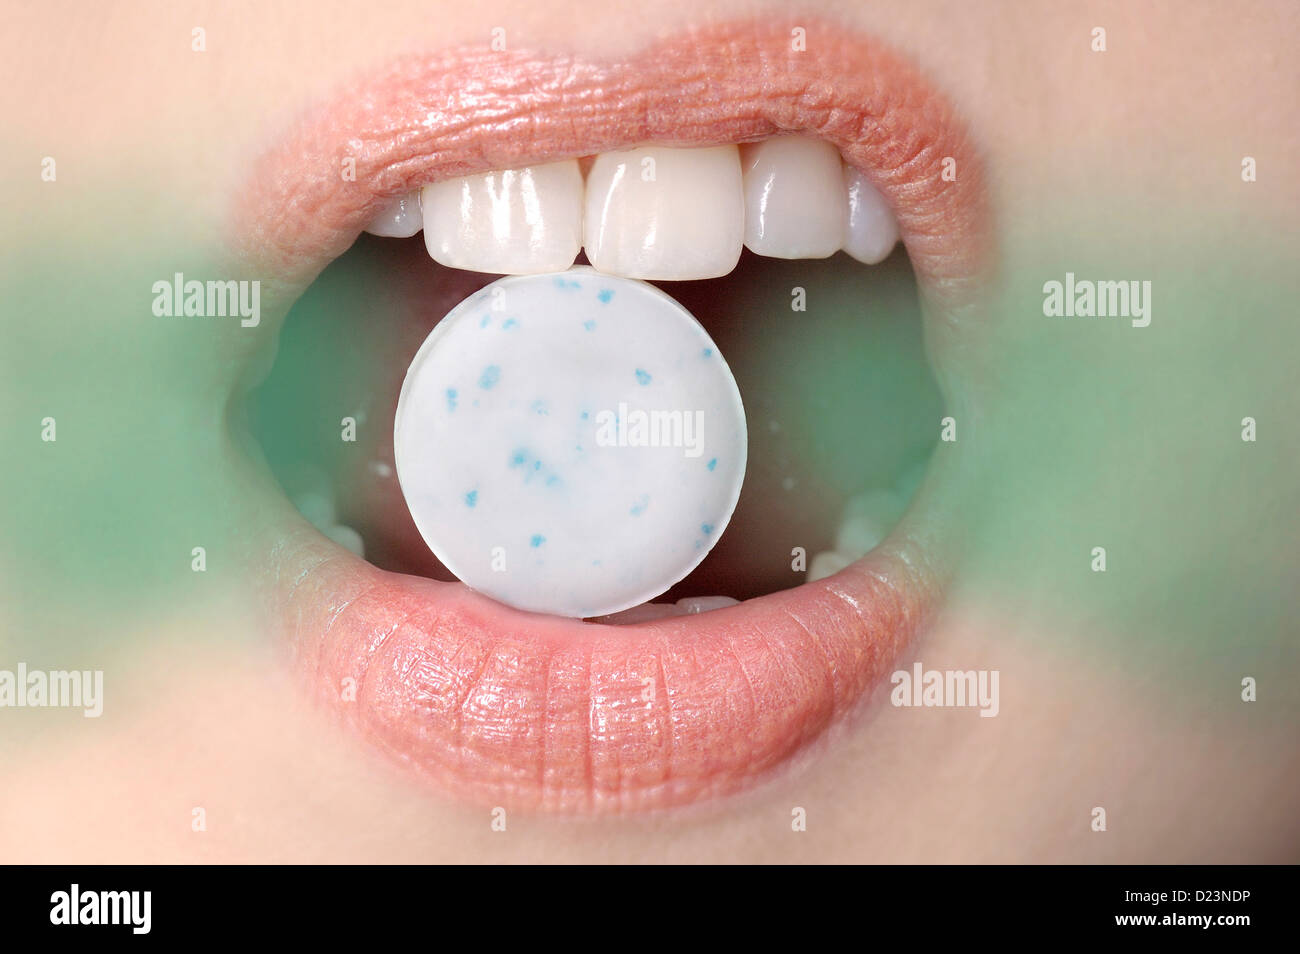 Female mouth with breath mint and bad breath odor coming out. Stock Photo